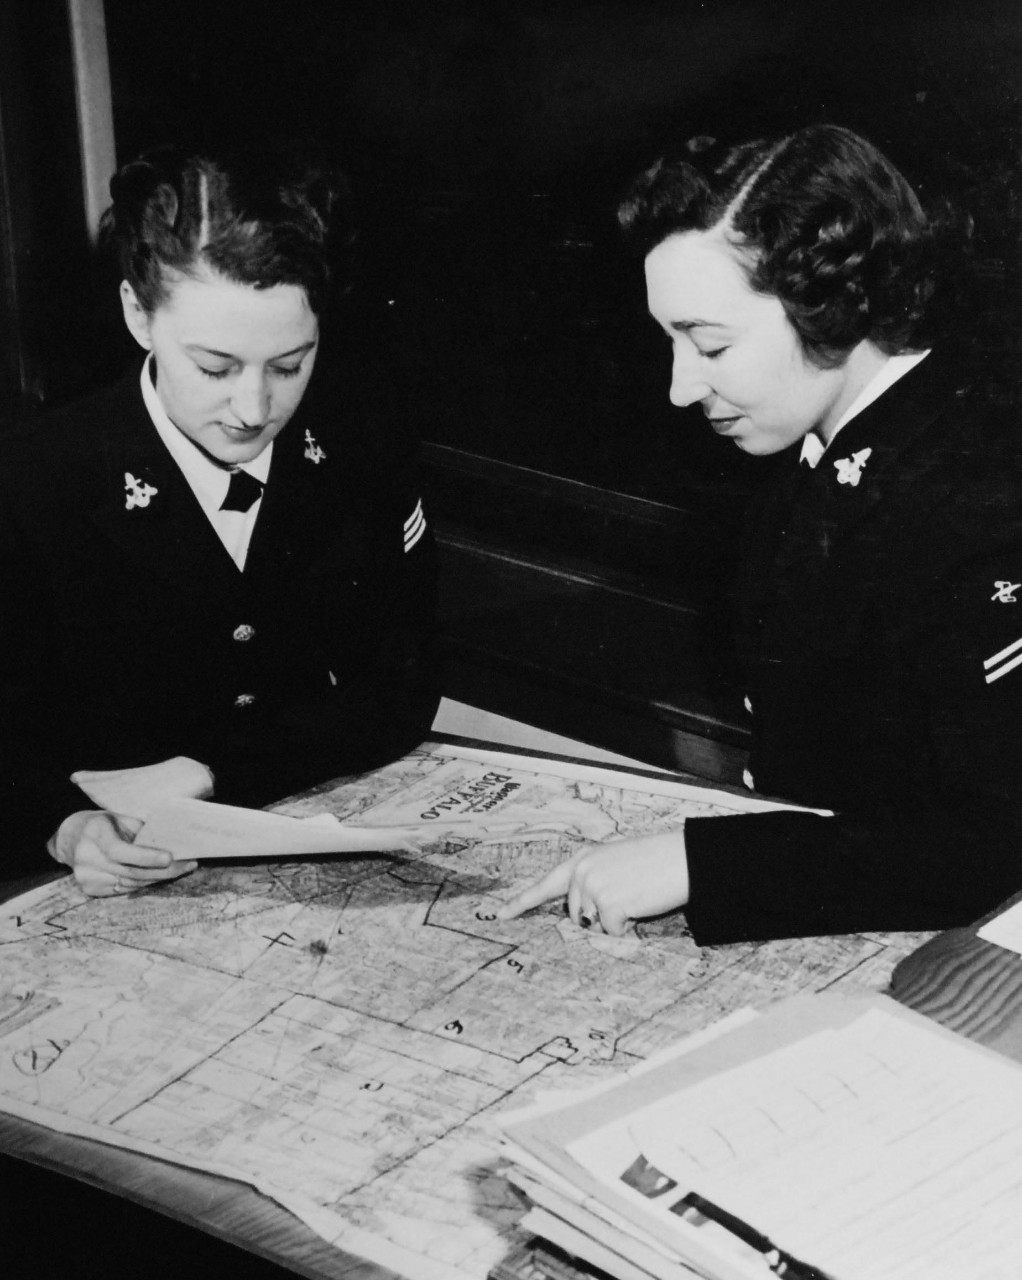 80-G-428486:   WAVES at Fleet Hometown News Center, Naval Training Center, Great Lakes, Illinois, May 1951.    Seaman Shirley L. Macdonald and Seaman Apprentice Elizabeth (?) pinpoint the news.  They are locating areas in cities in order to send news items to community newspapers.   Official U.S. Navy photograph, now in the collections of the National Archives. 